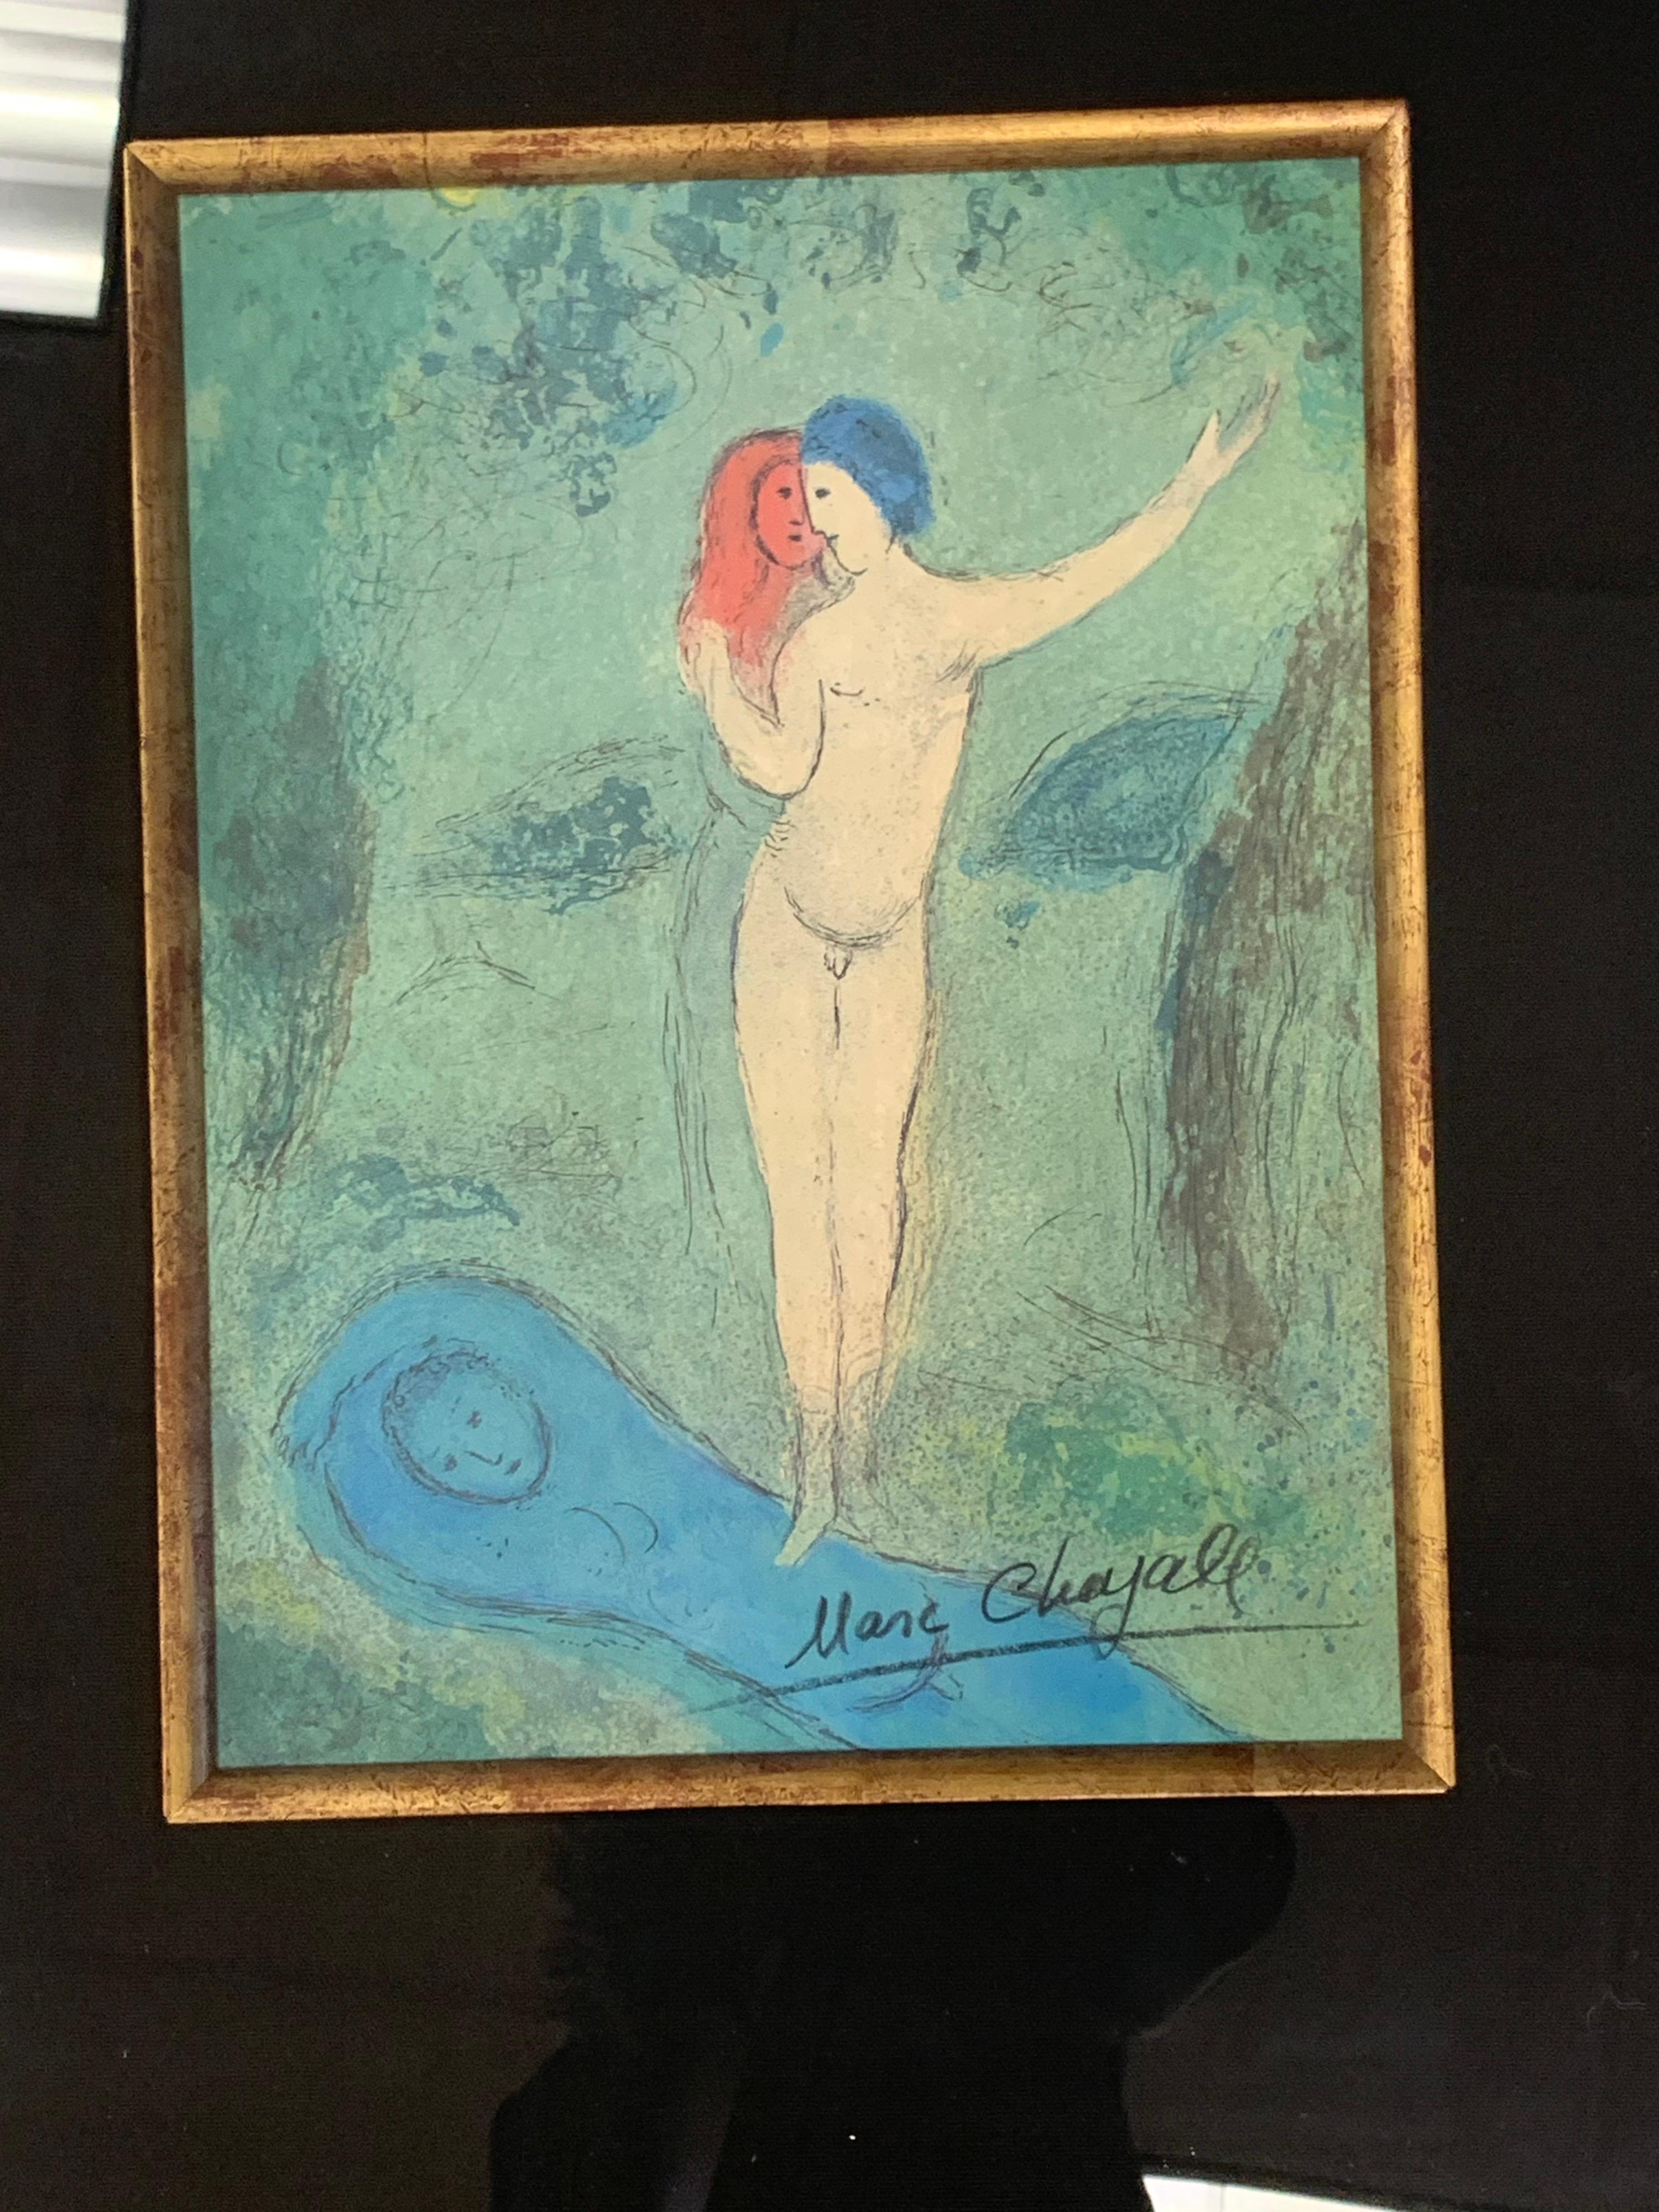 Coveted signed Marc Chagall lithograph titled 